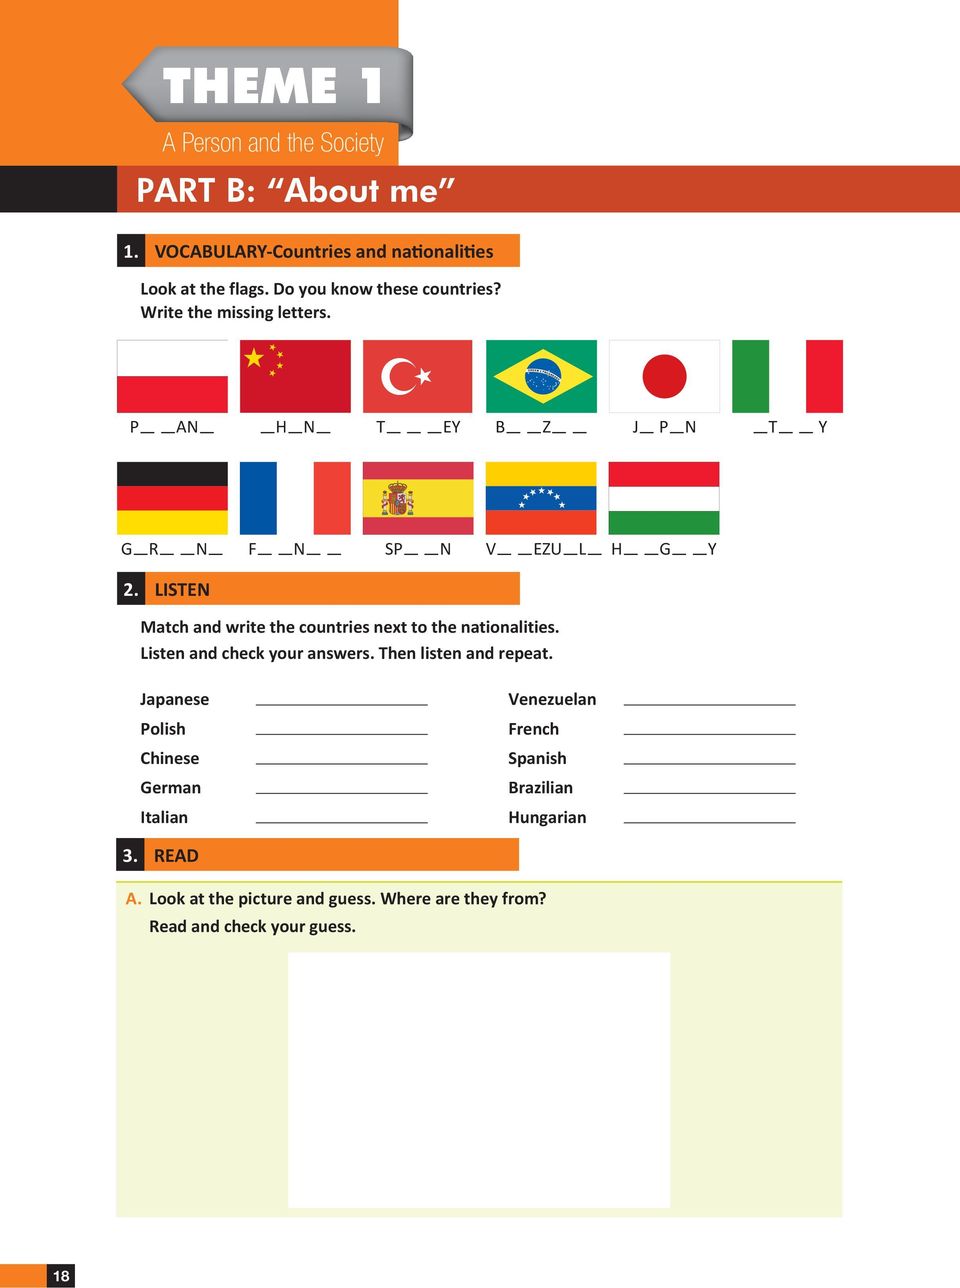 LISTEN Match and write the countries next to the nationalities. Listen and check your answers. Then listen and repeat.